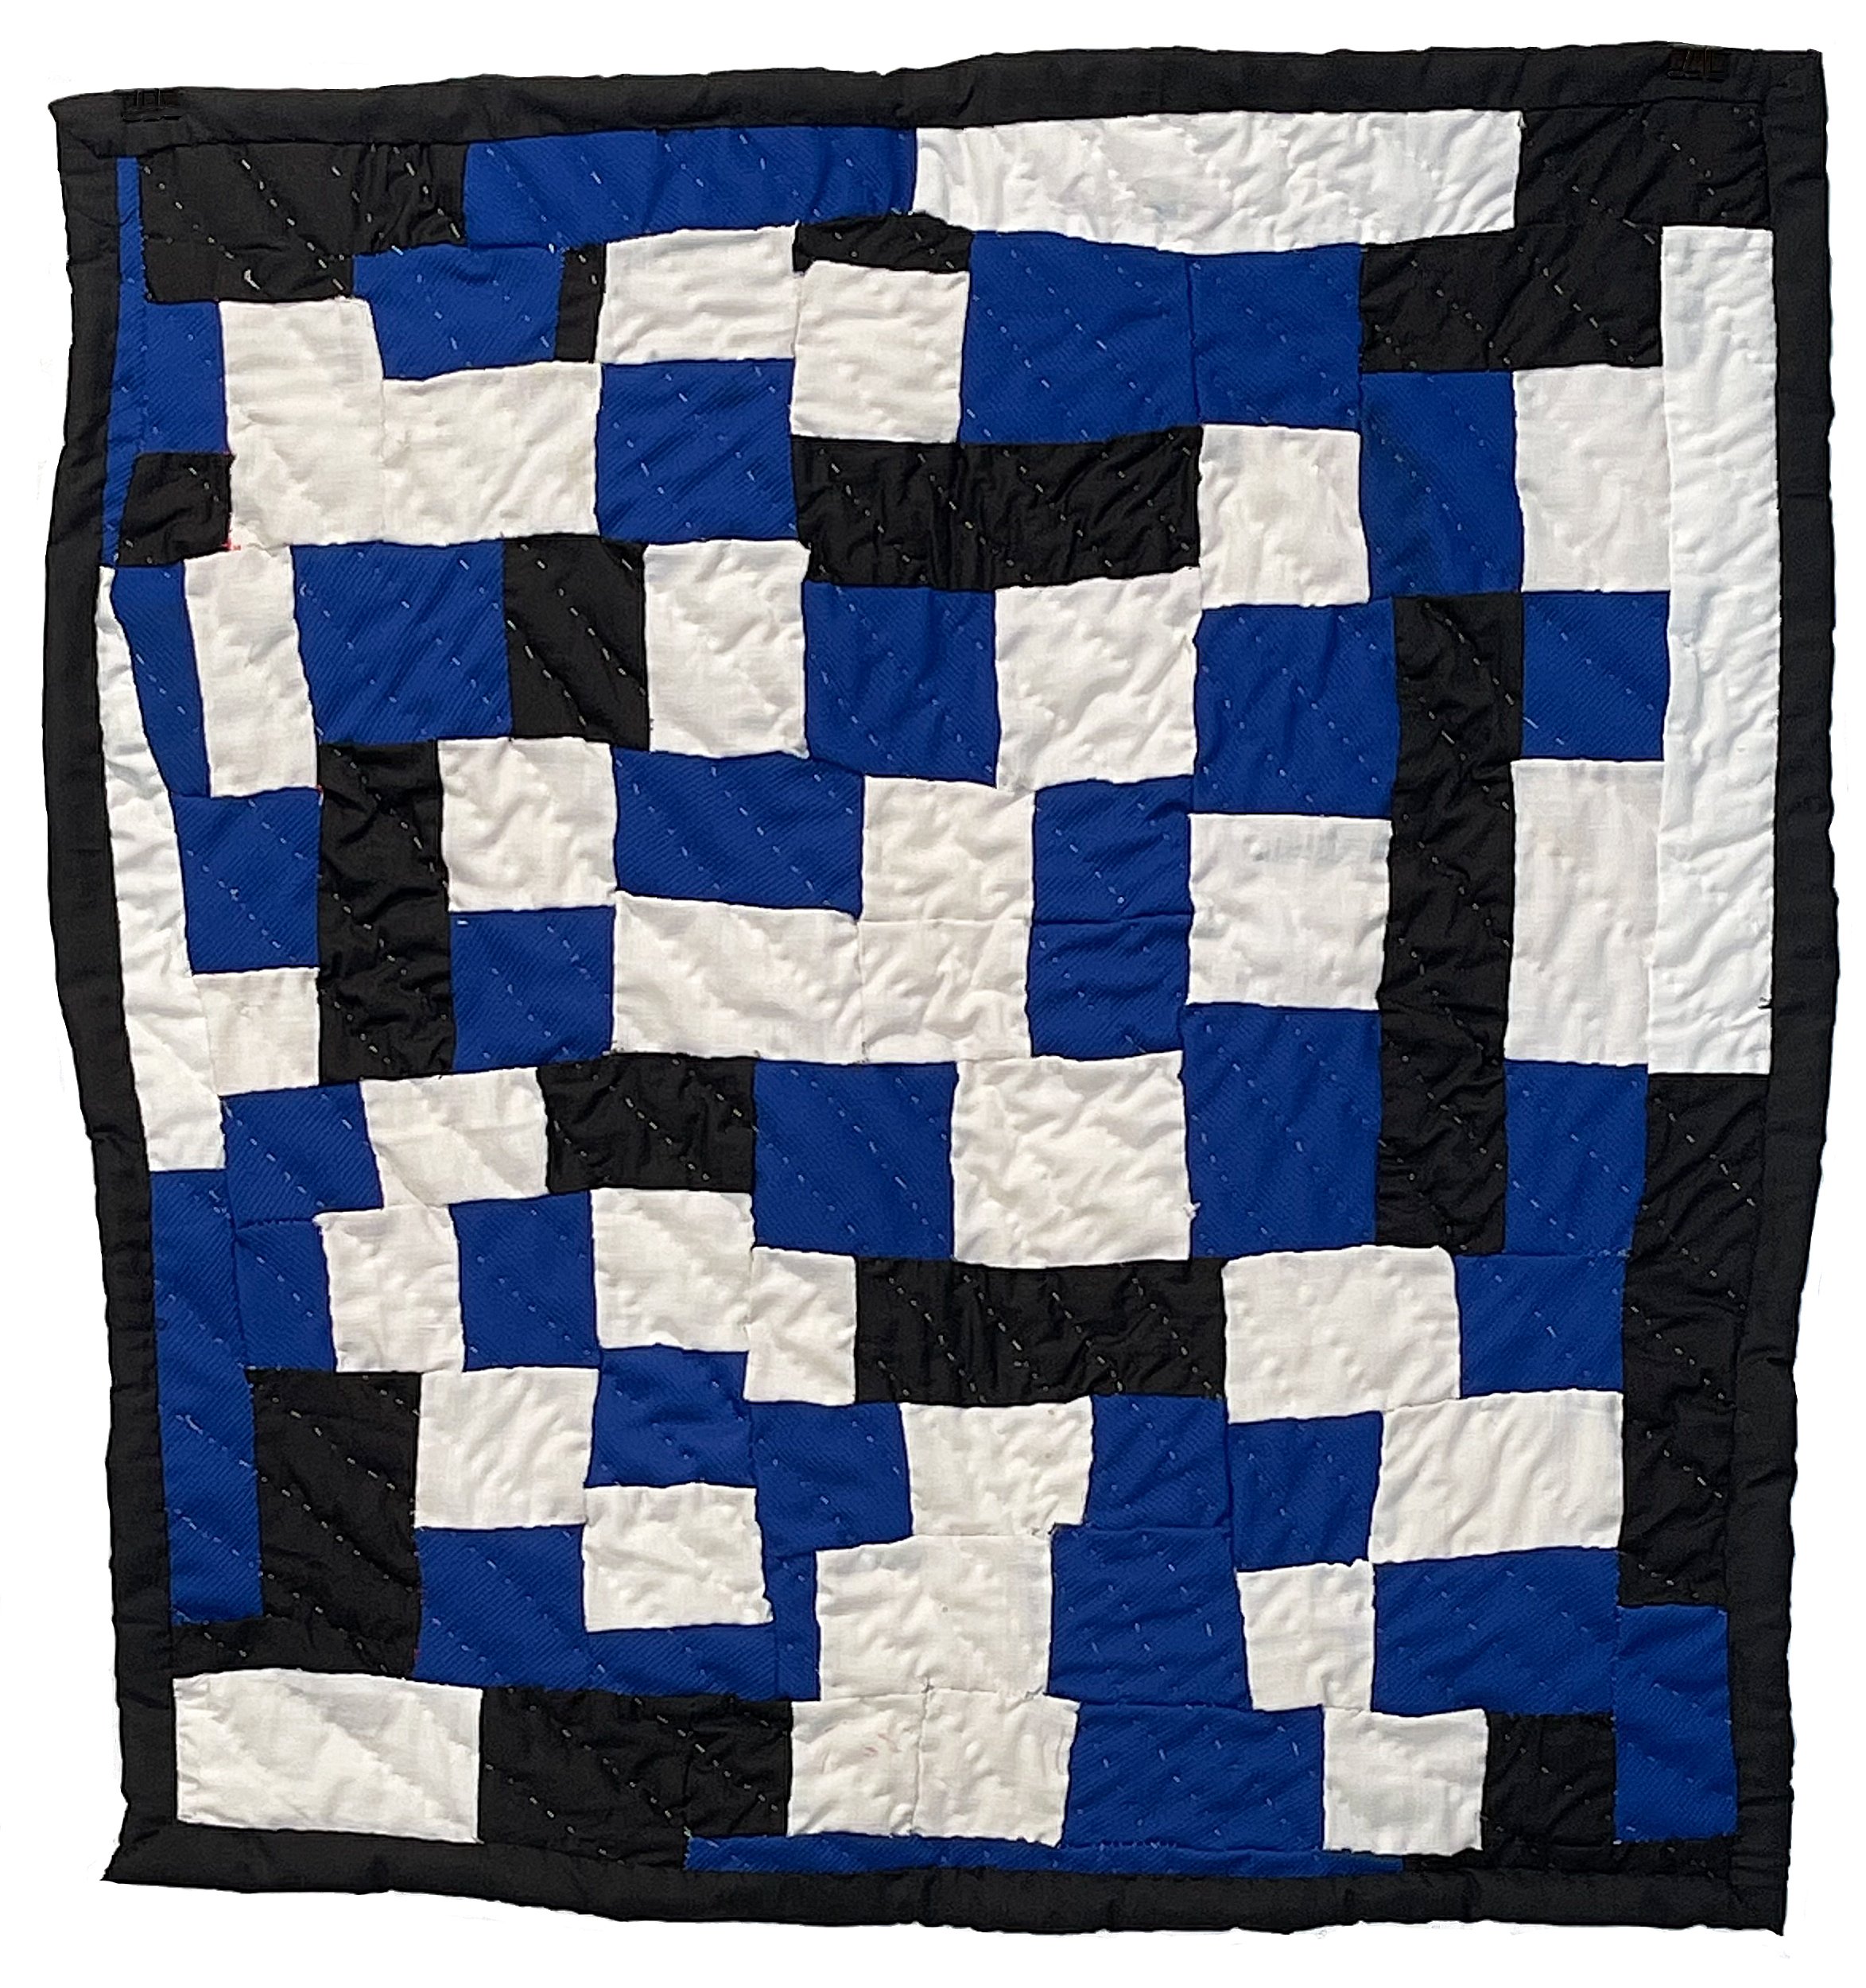   Kristin Pettway, Gee’s Bend, AL    Block variation quilt/wall-hanging,  2021  26" x 25"  Cotton fabrics  Hand-pieced, hand-quilted    ASK ABOUT THIS QUILT   